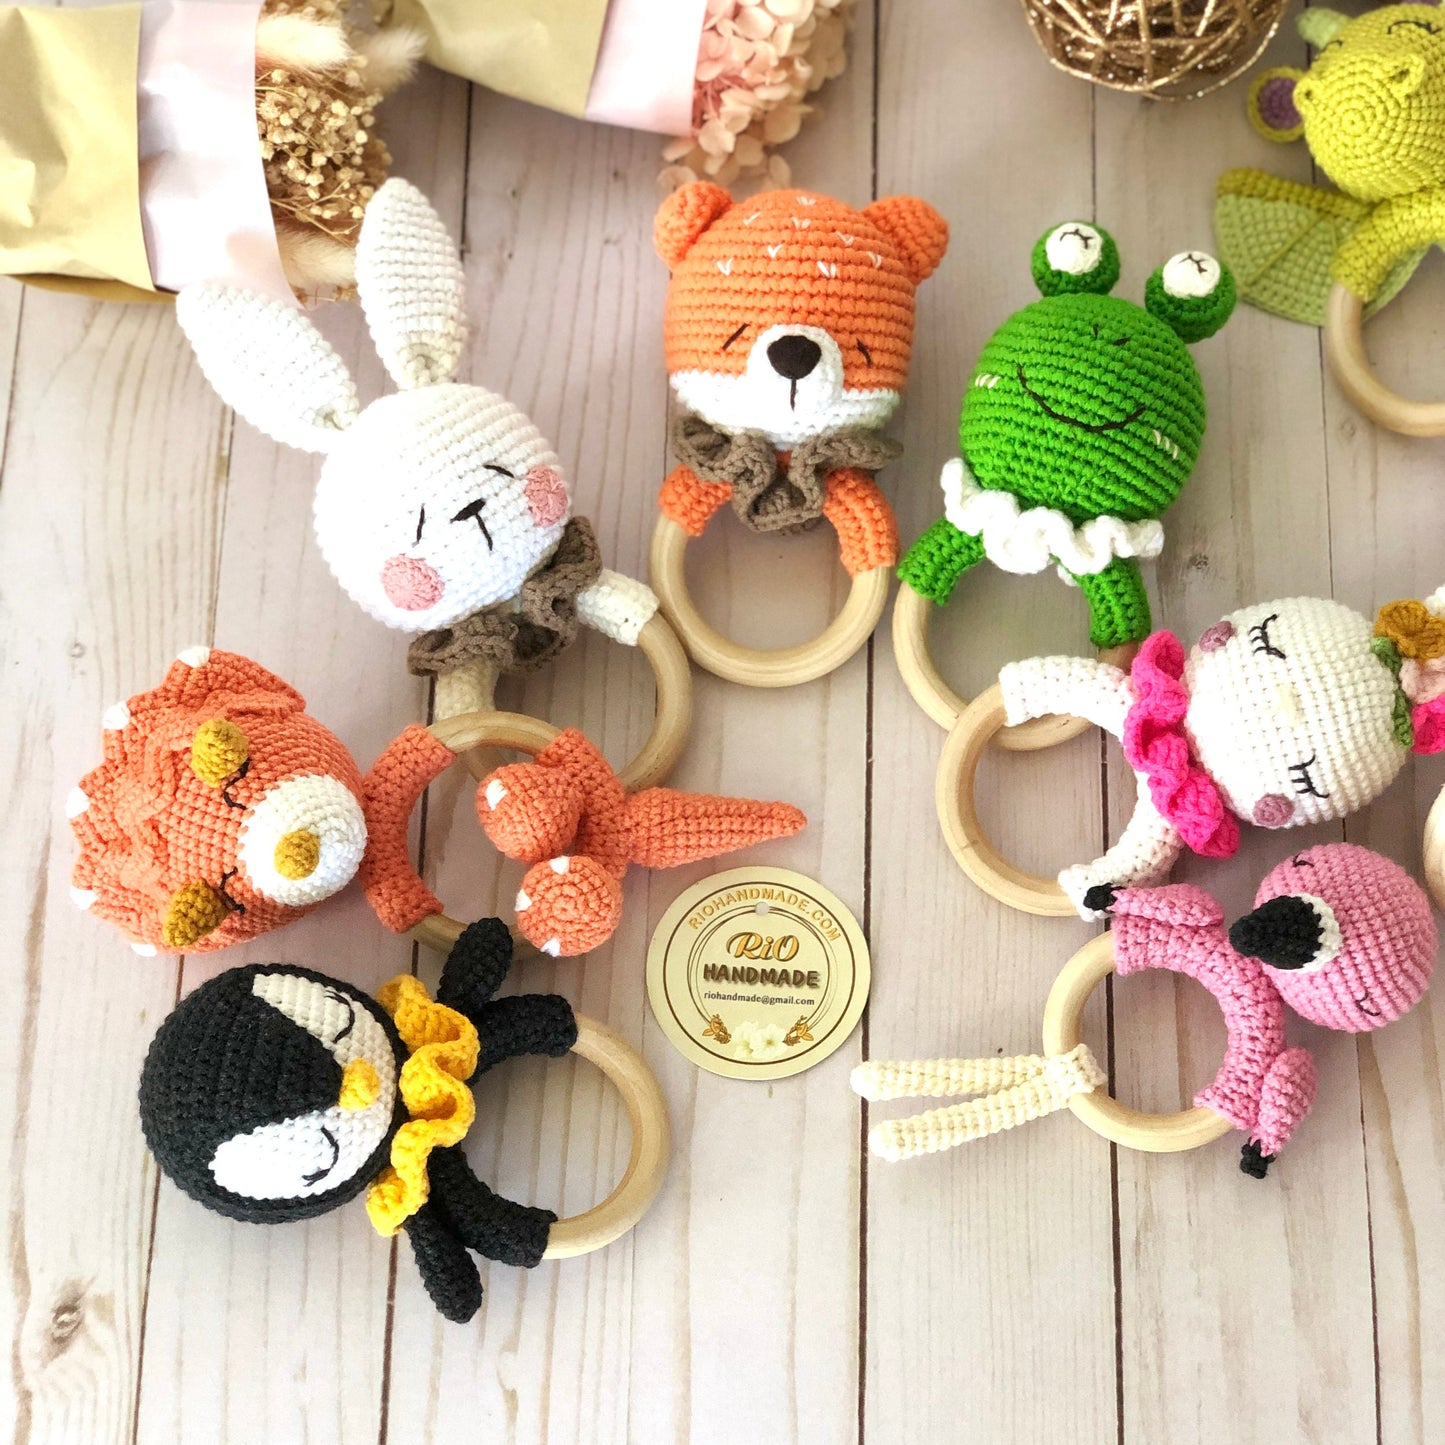 Personalized Baby Gift, Animal Newborn Baby Rattle, Baby Crochet Rattle Gift, Toy Rattle With Name